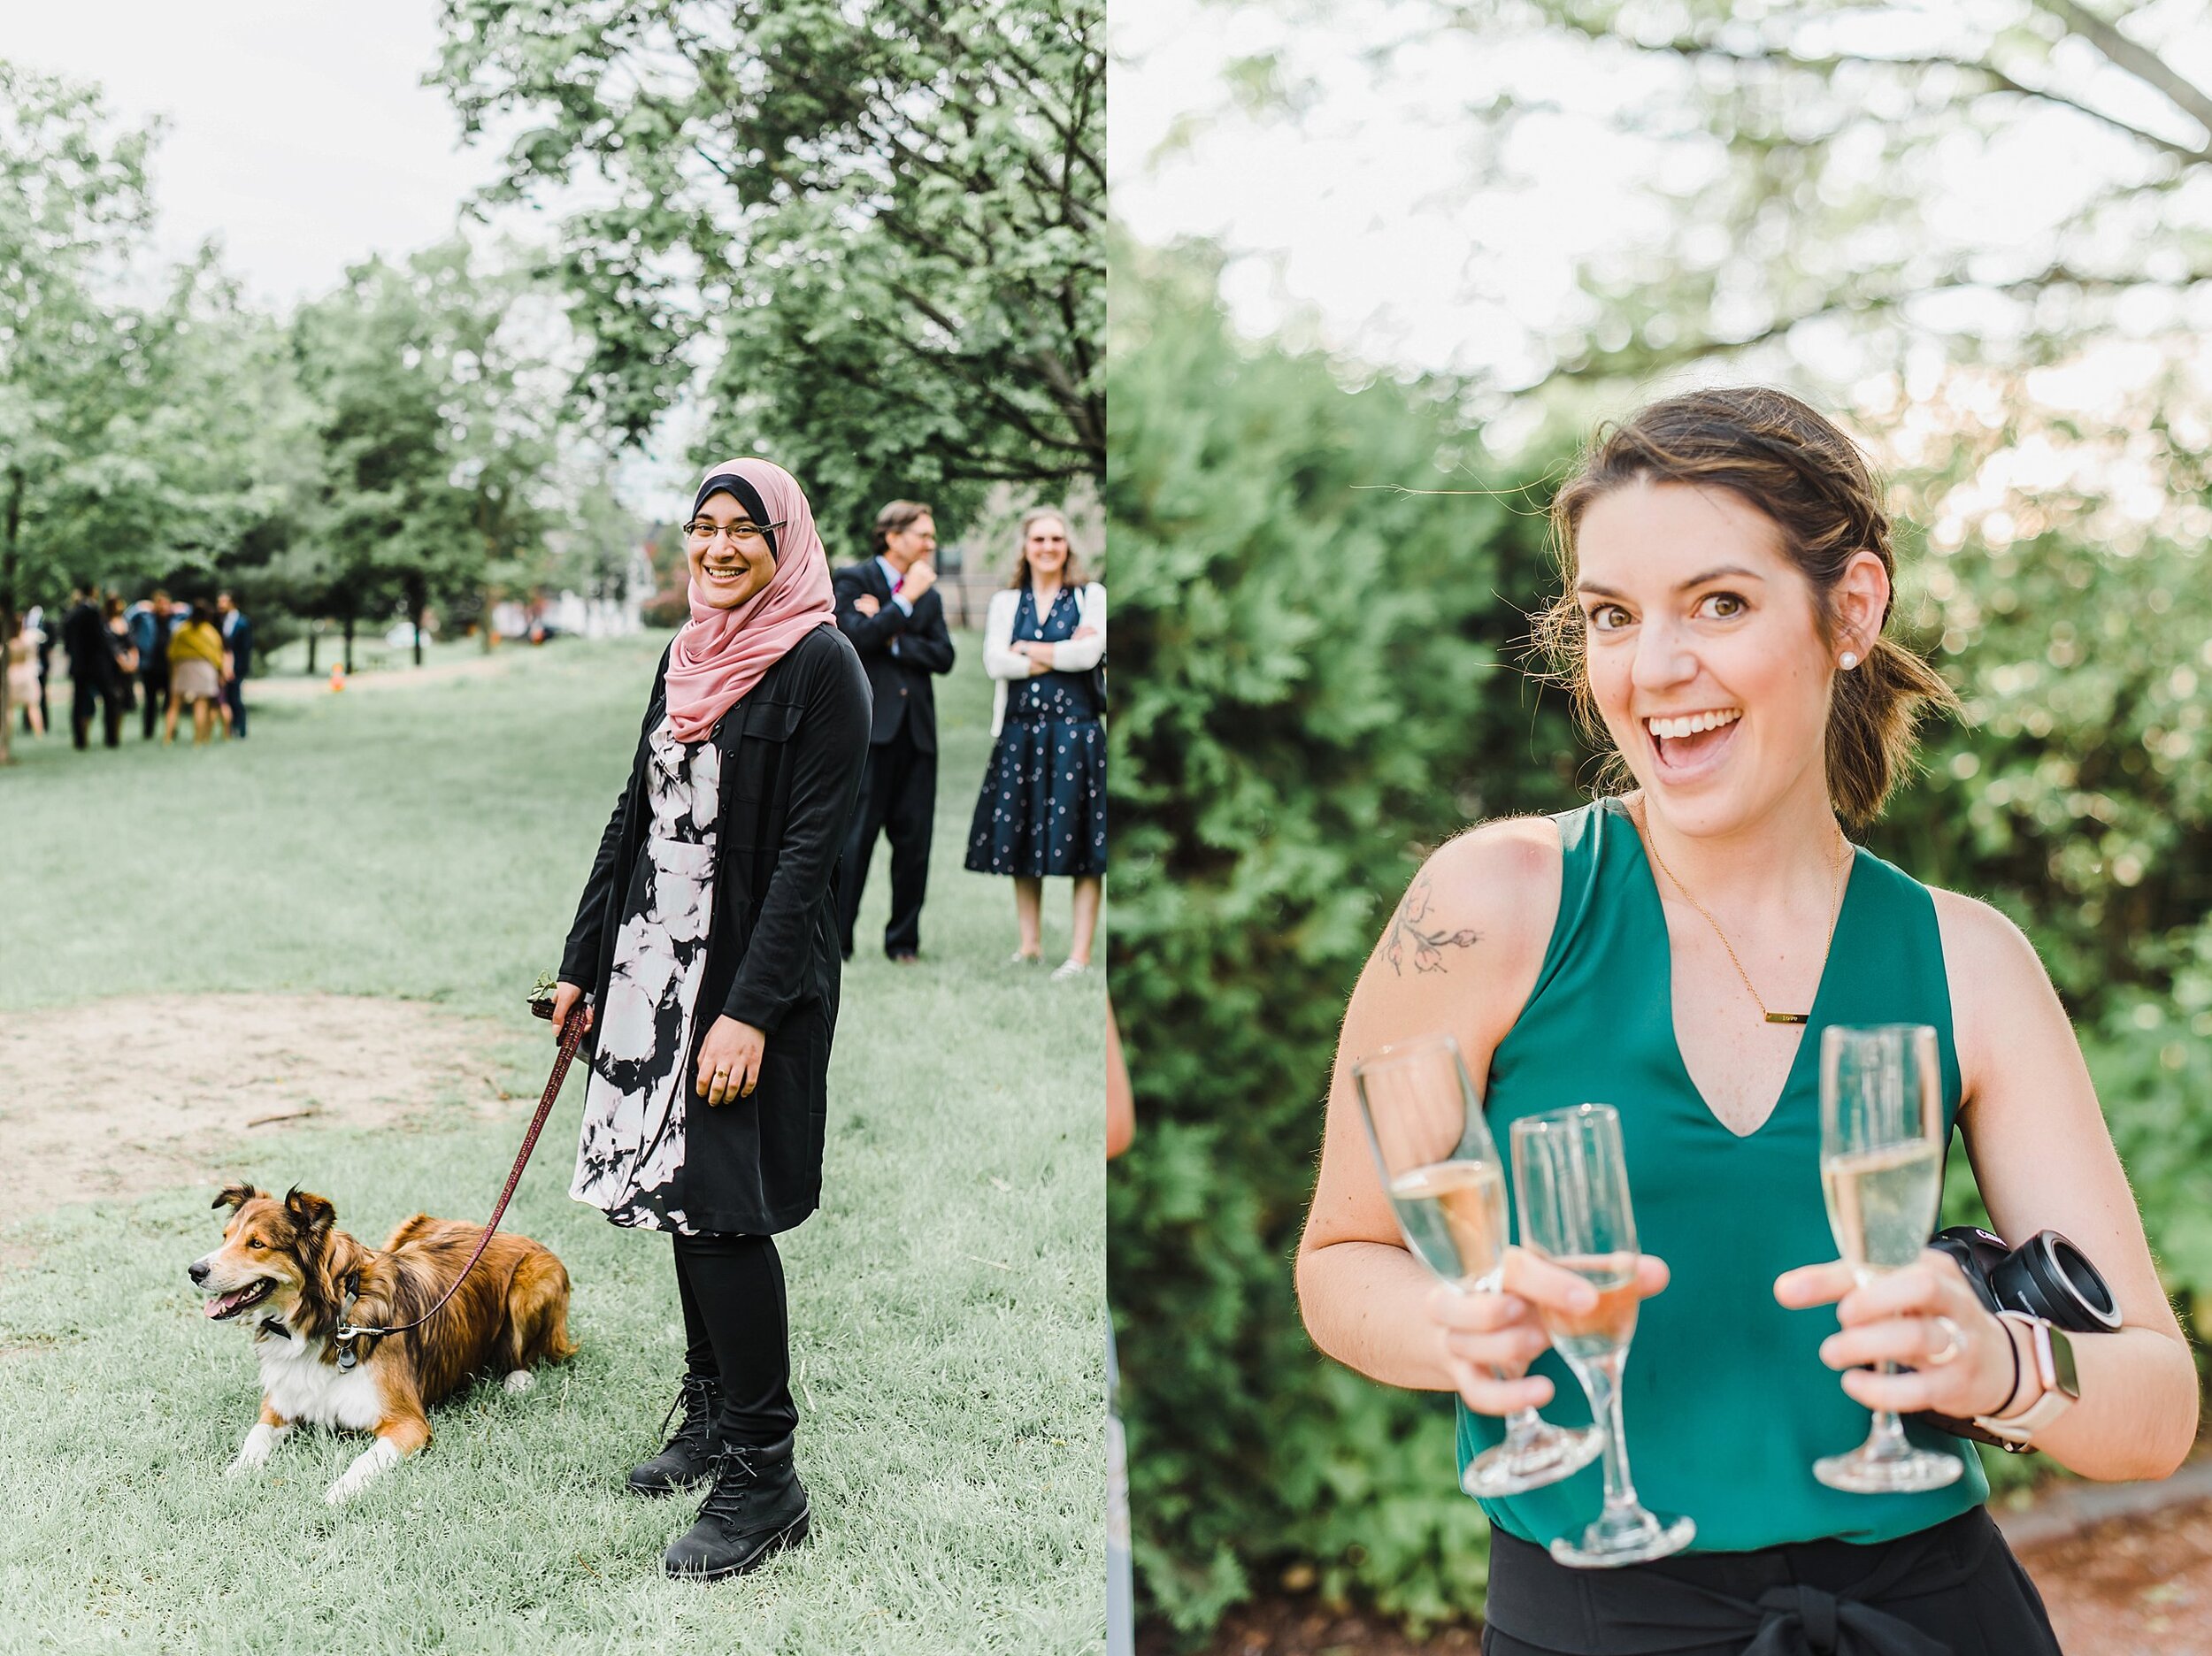  My team not only takes your photos, we also walk dogs and hold your champagne flutes when you need to run to the washroom!  Another shout out to my incredible assistant, Zaynab, who made every wedding this year even more easy for me to manage!  And 